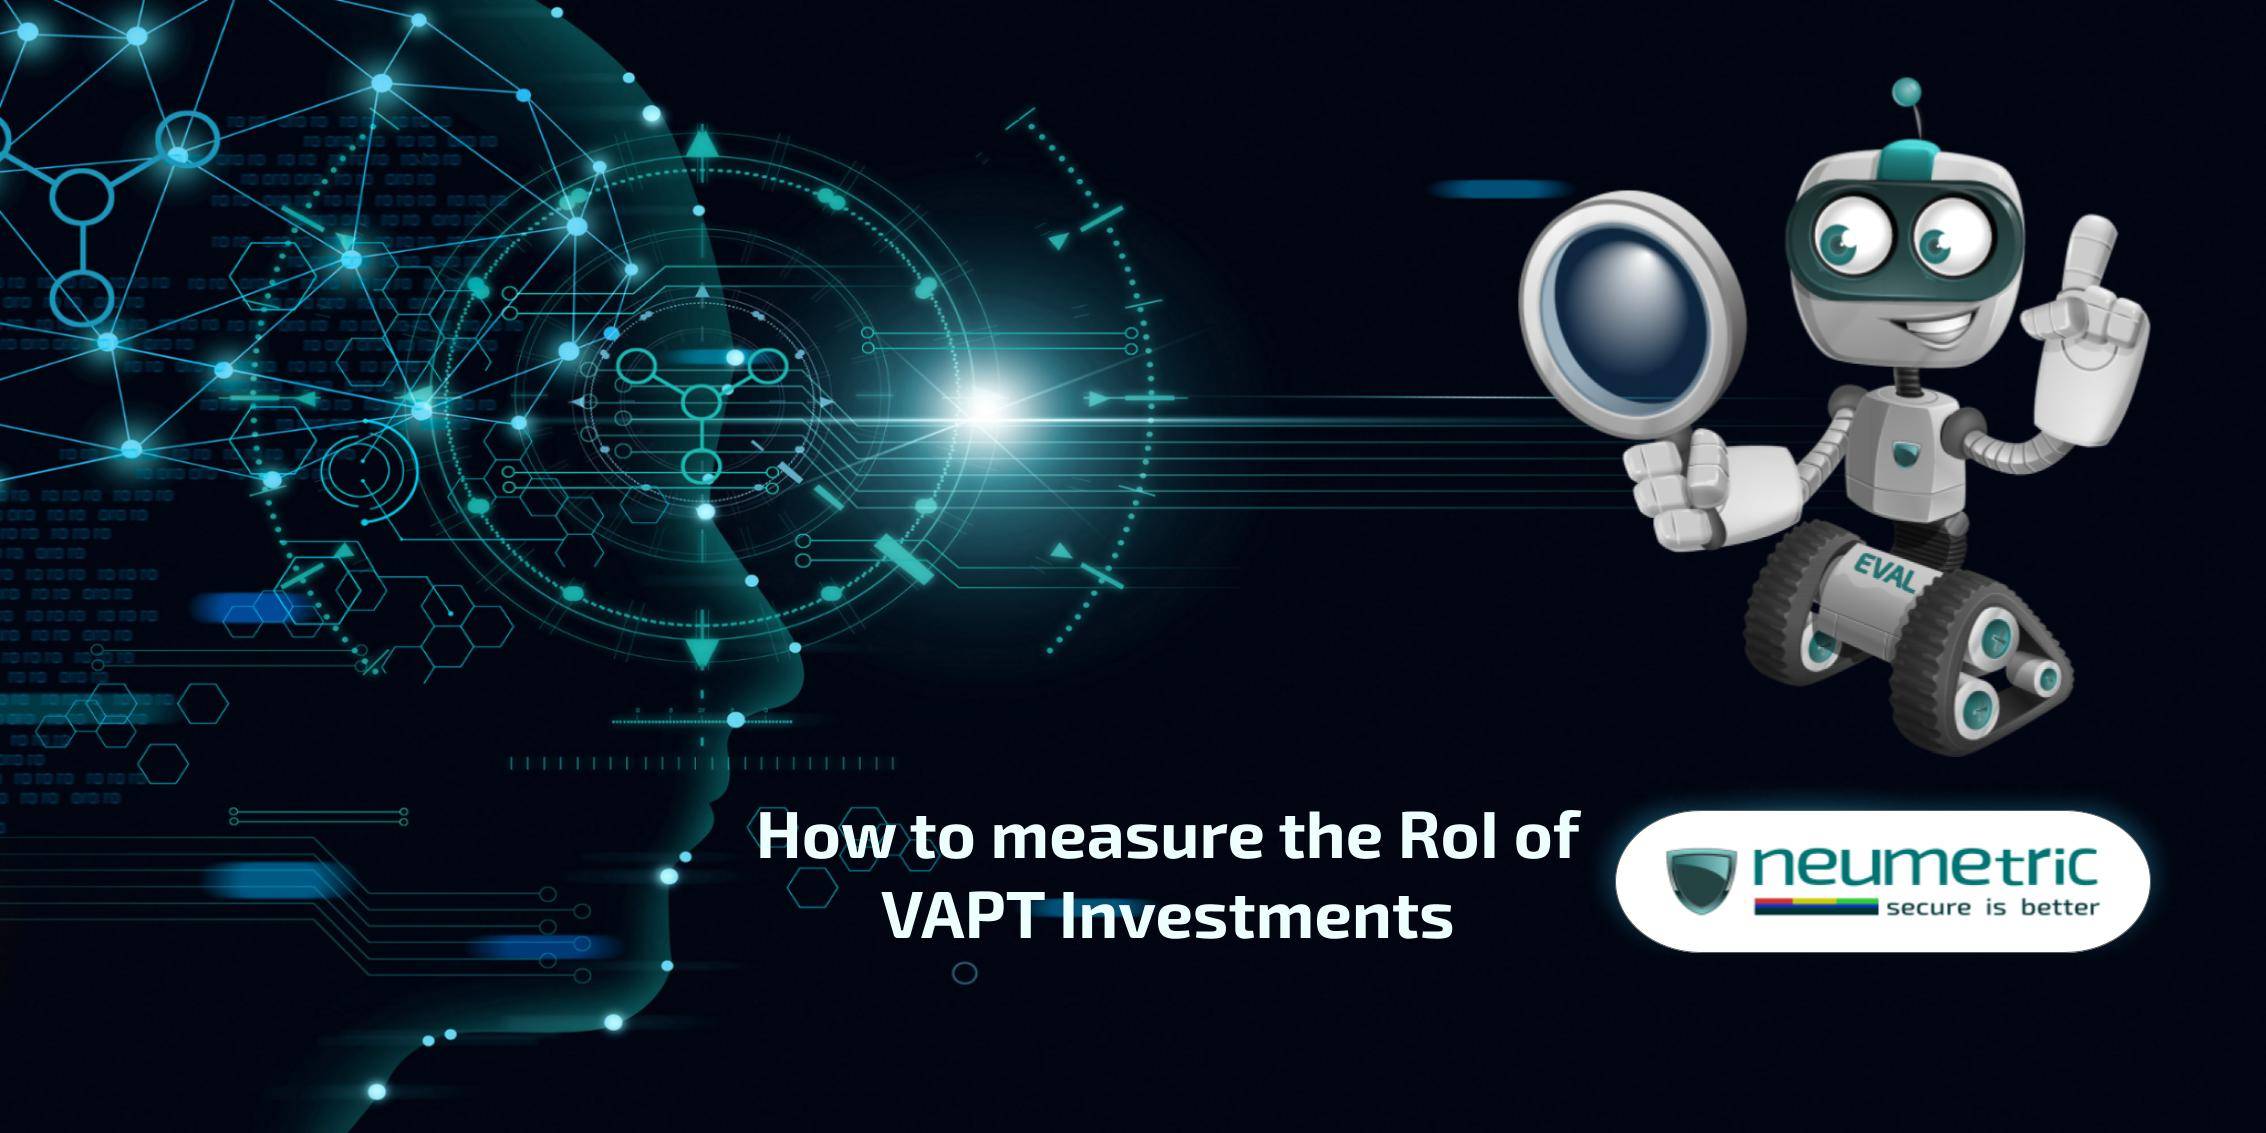 How to measure the RoI of VAPT Investments